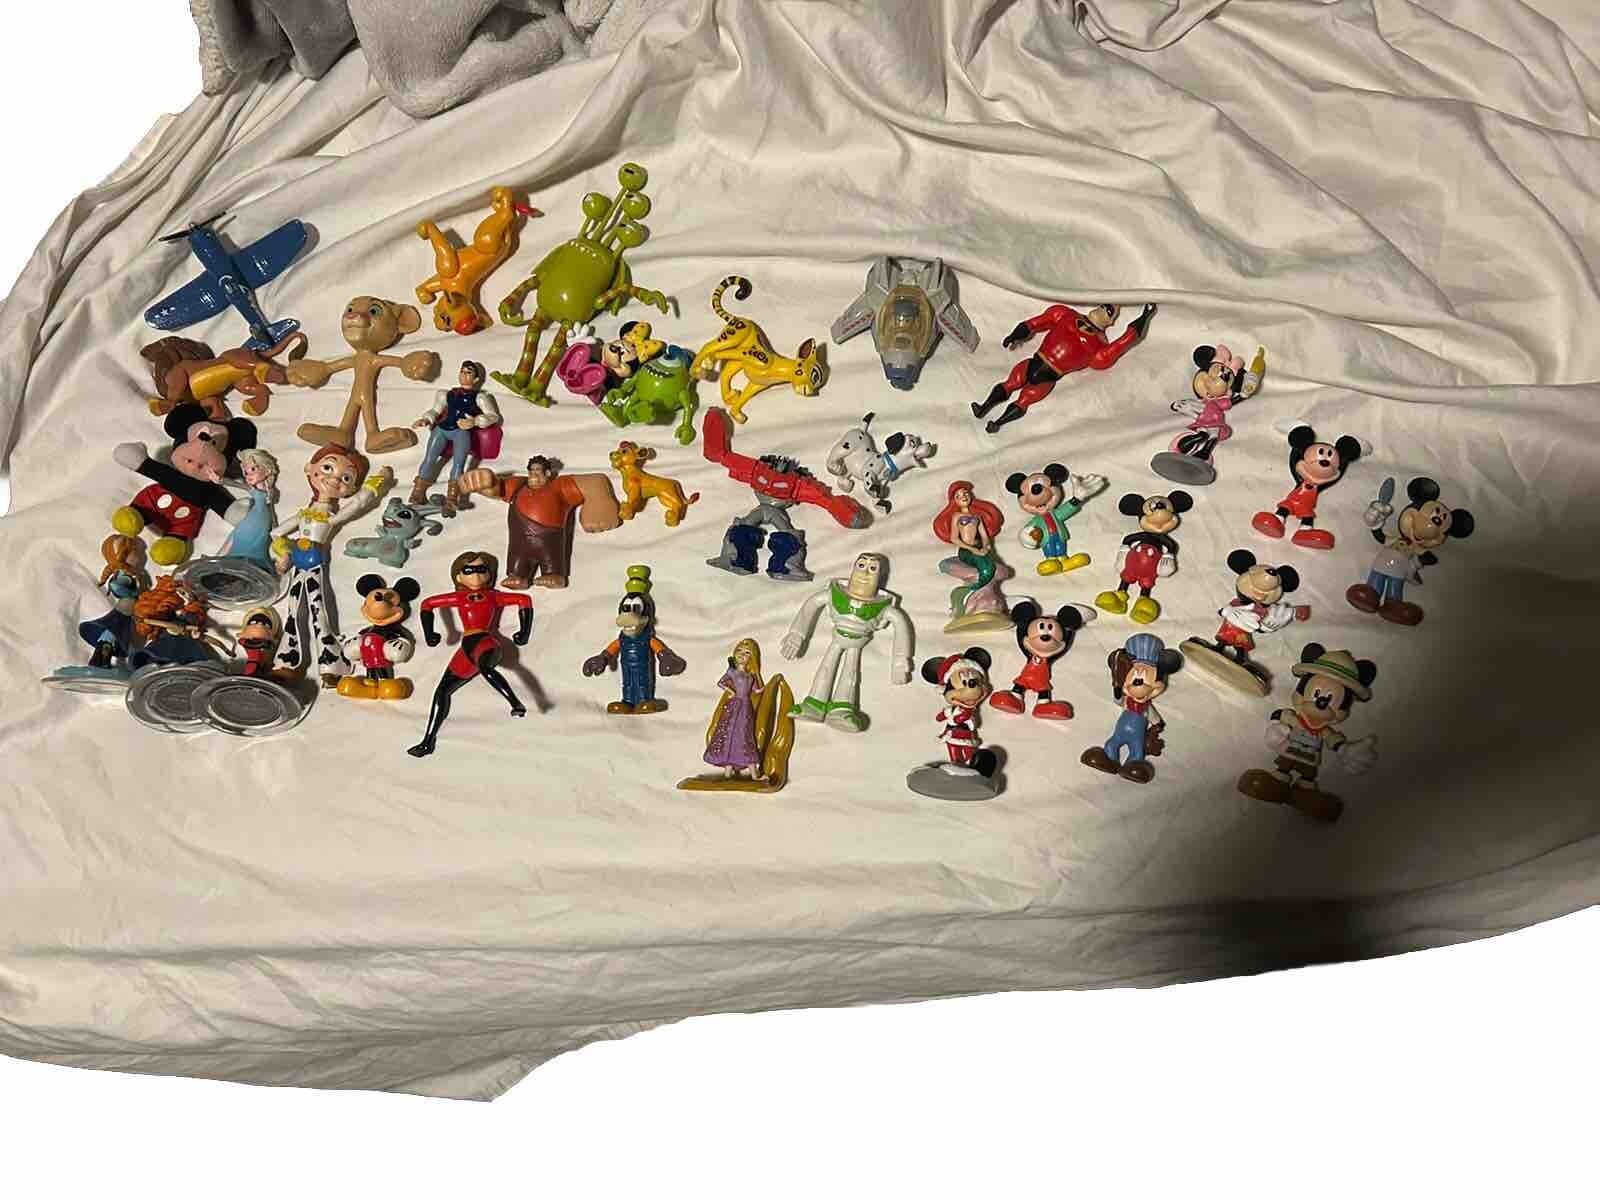 Rare Vintage Disney Figurines. Mickey Mouse, Frozen, Incredibles, Lion King